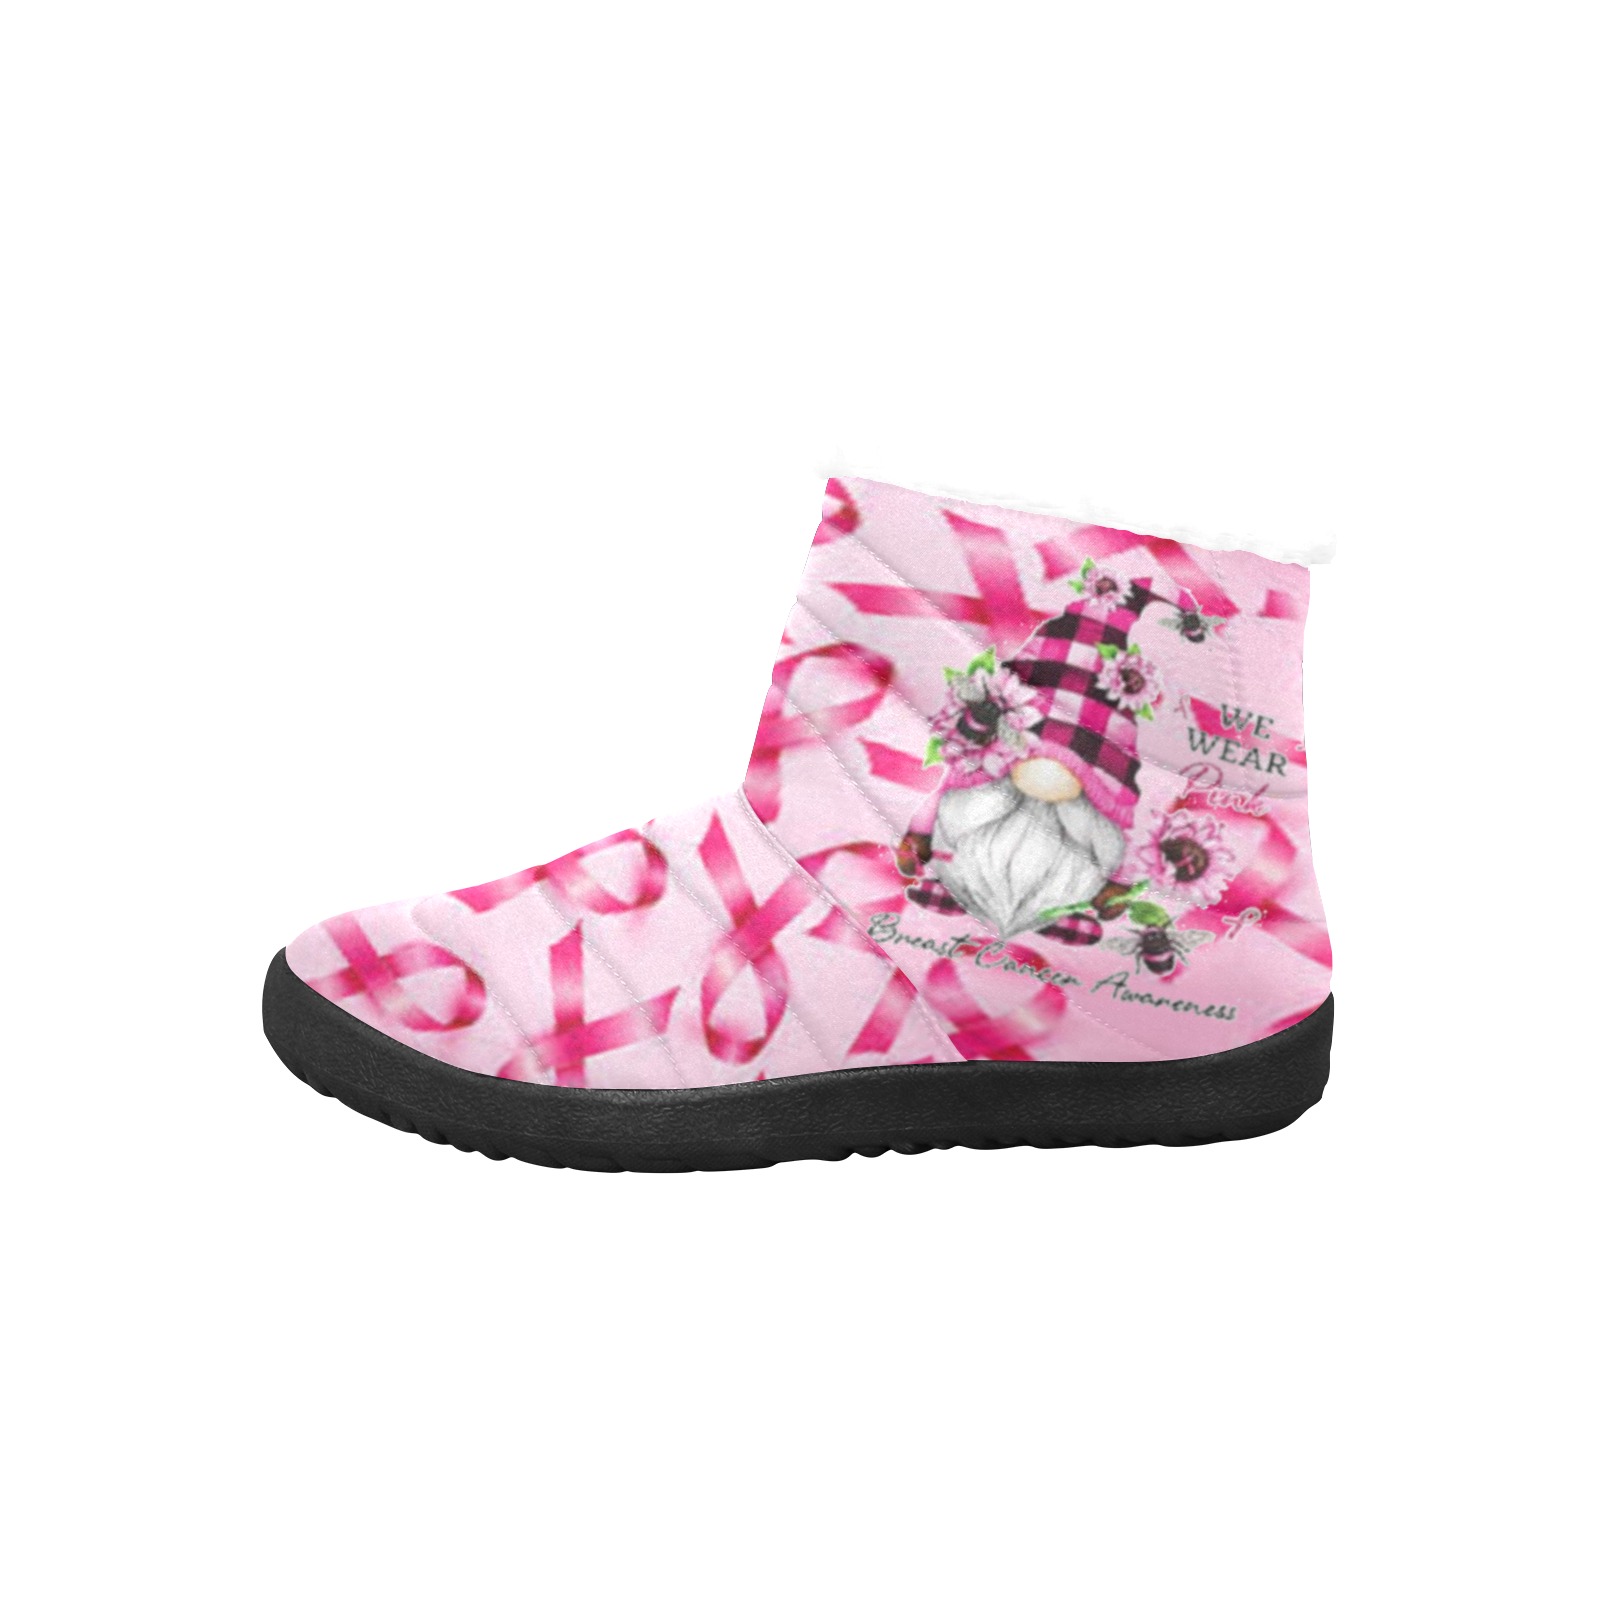 Pink gnome and ribbons Women's Cotton-Padded Shoes (Model 19291)